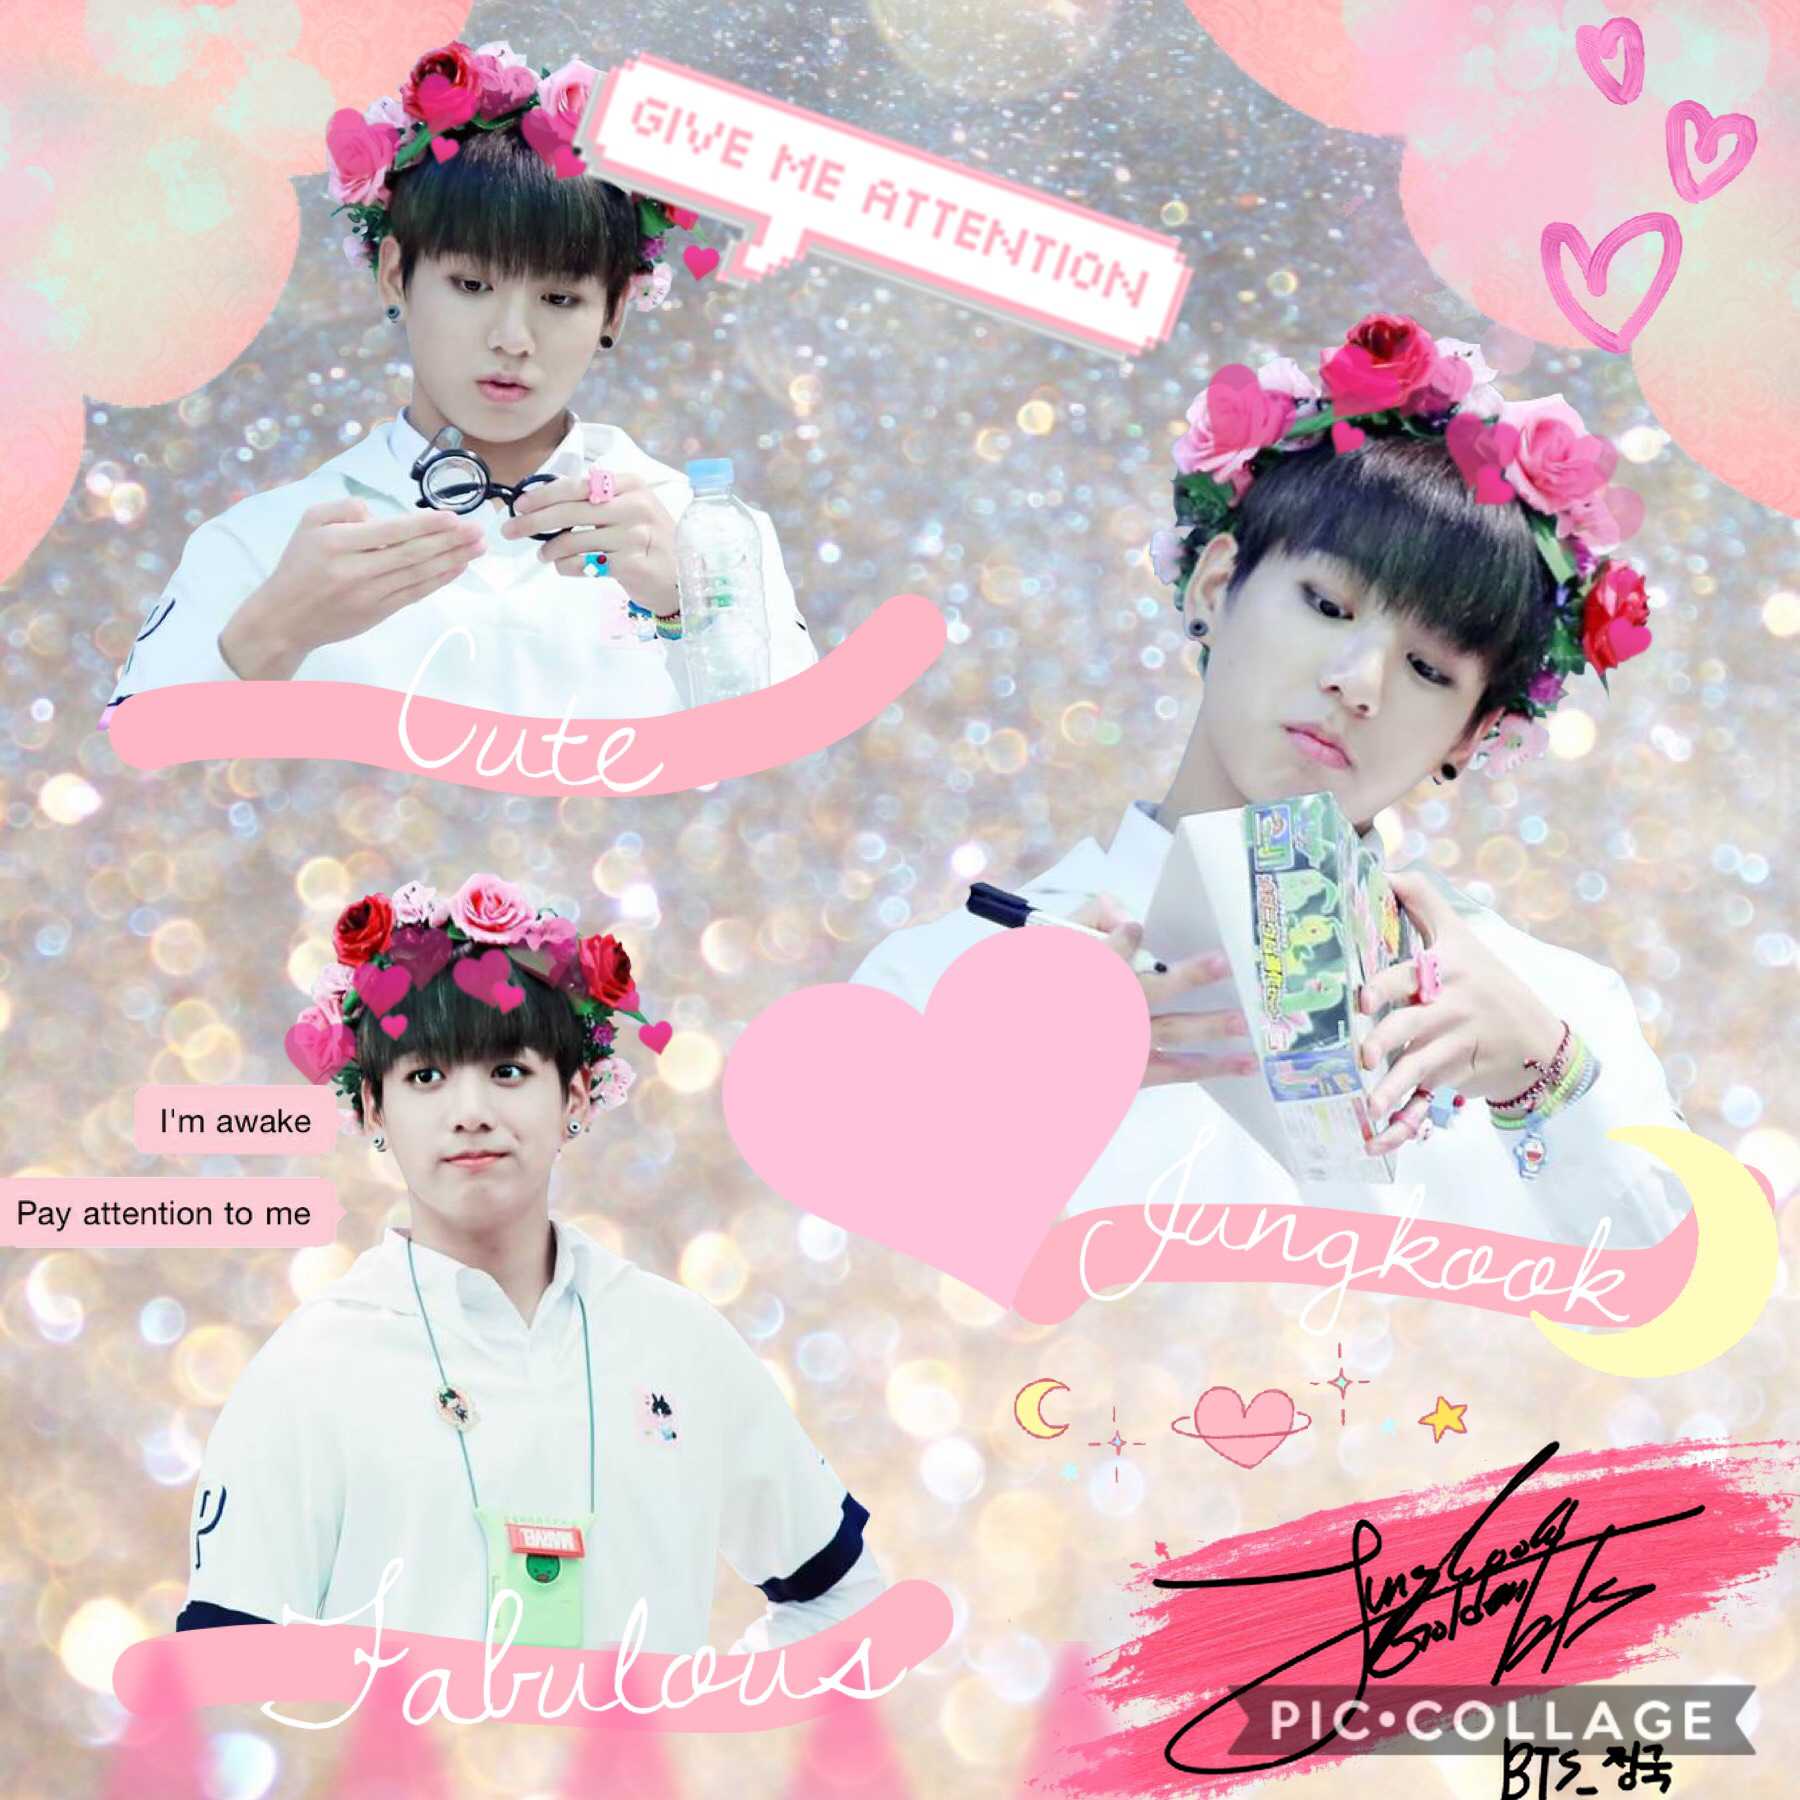 Collage by Jeonkook